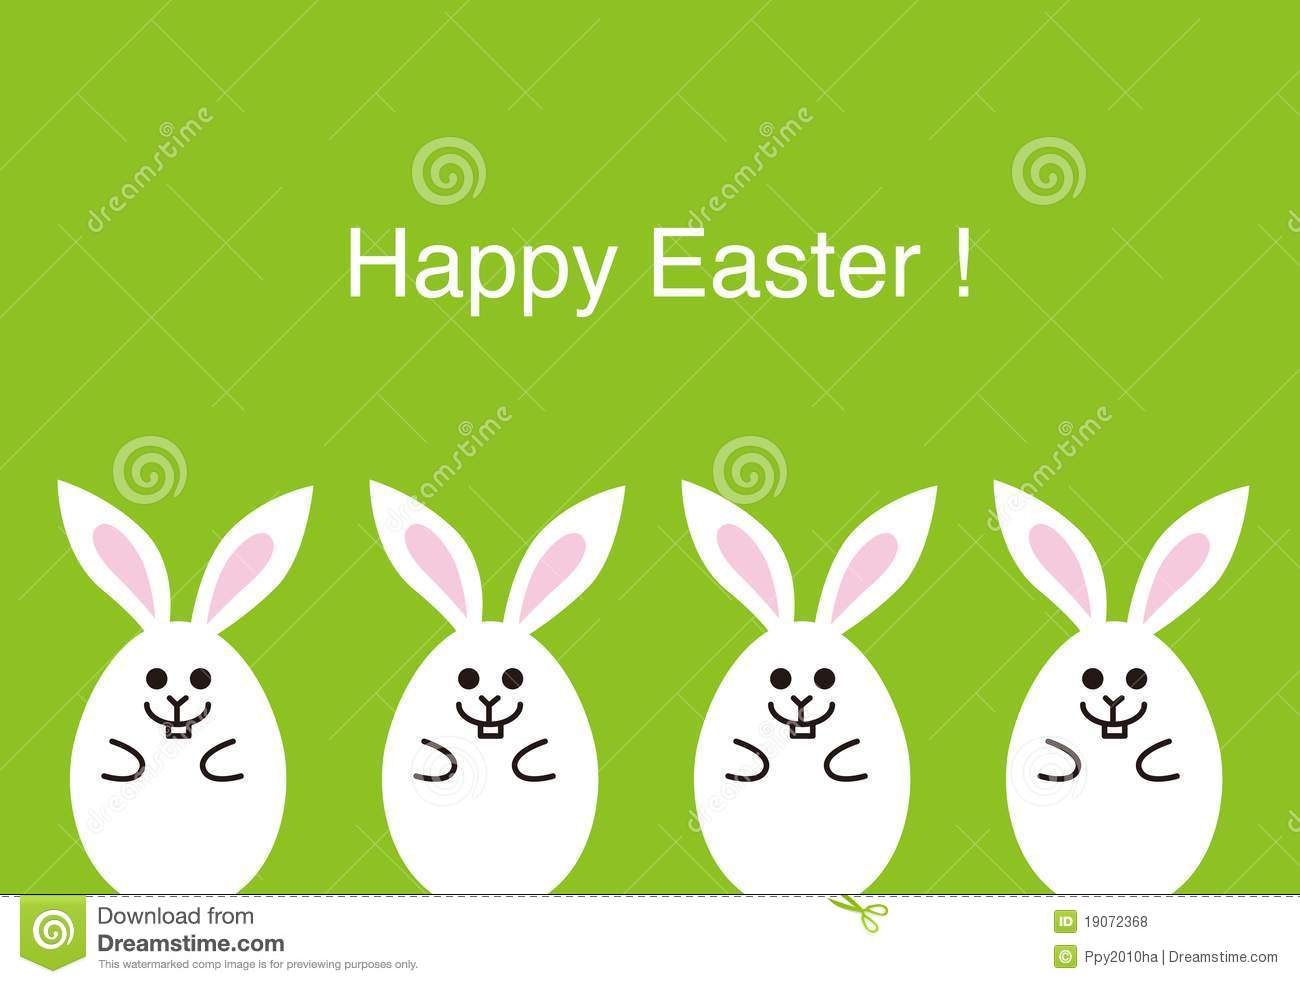 Happy Easter Bunnies Picture Greeting Card